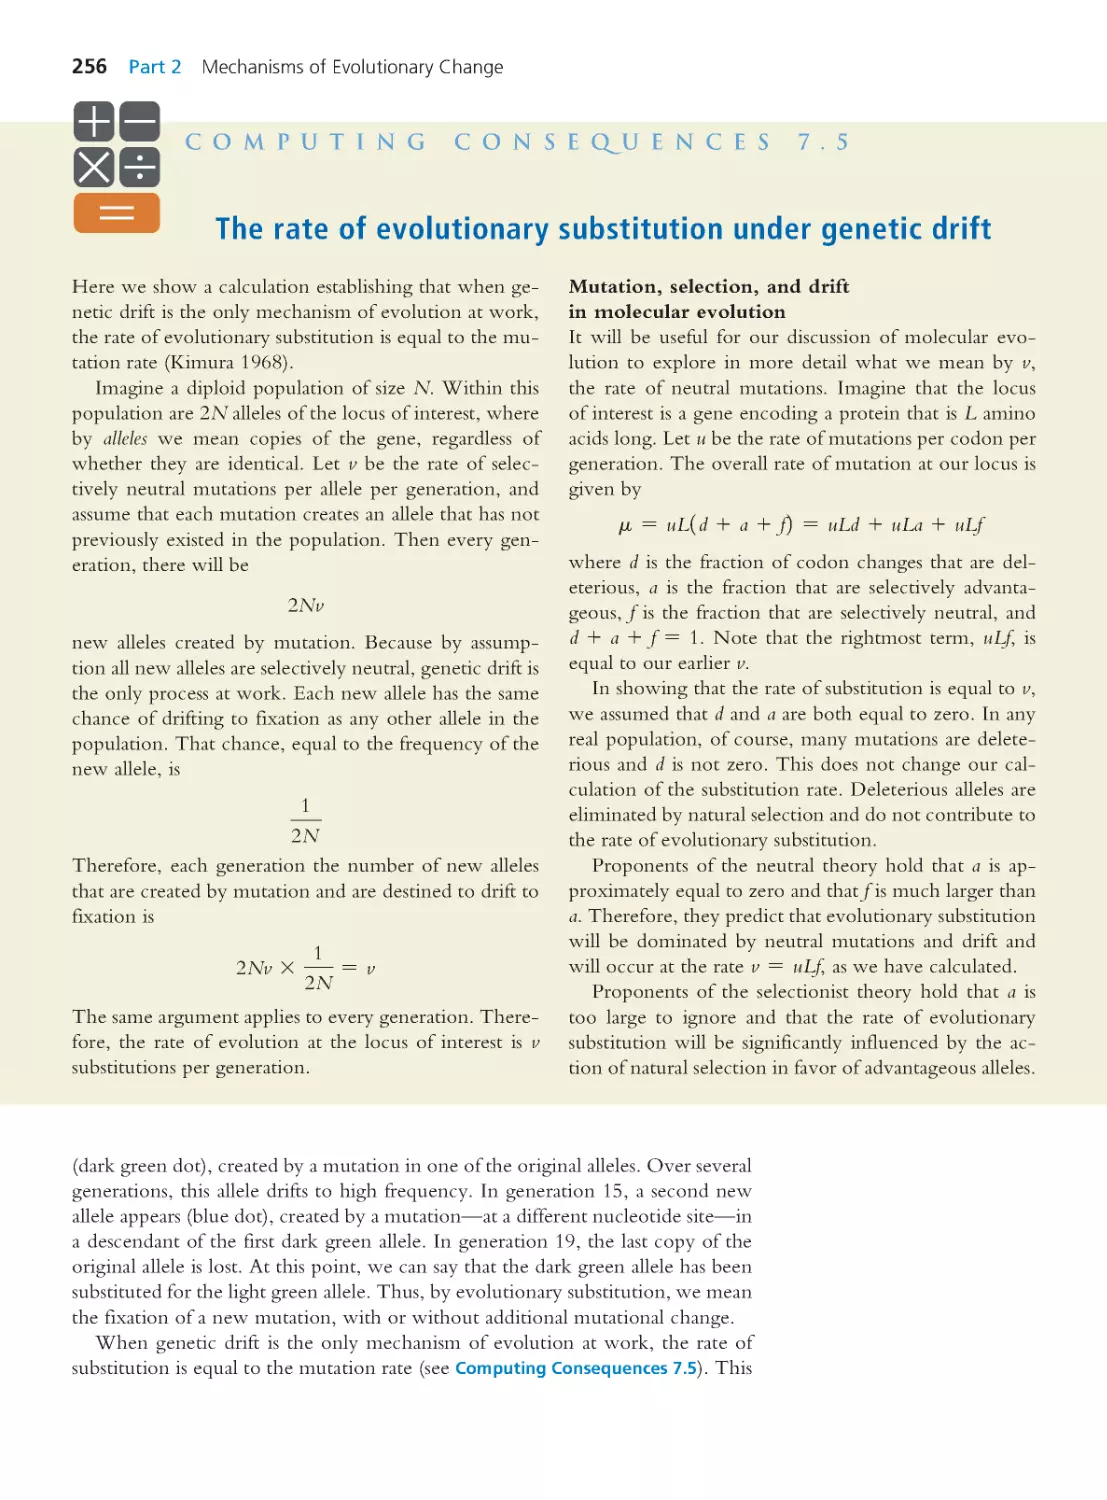 Computing Consequences 7.5 The rate of evolutionary substitution under genetic drift